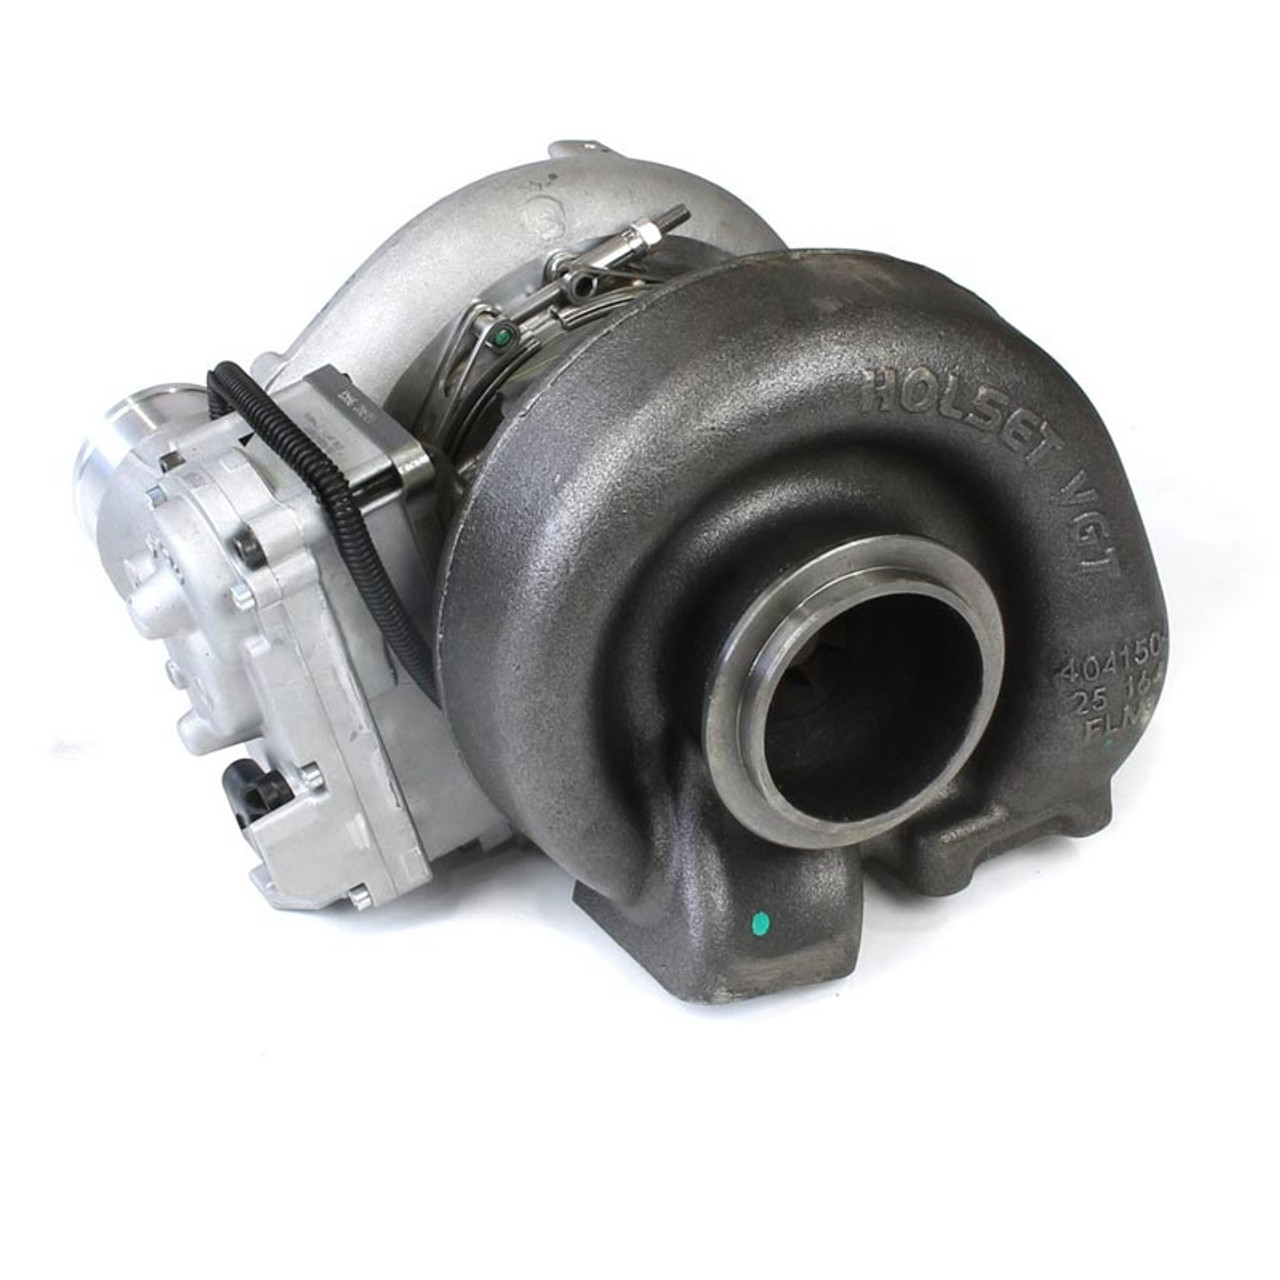 HOLSET OEM REMAN REPLACEMENT HE351VE TURBOCHARGER-View 